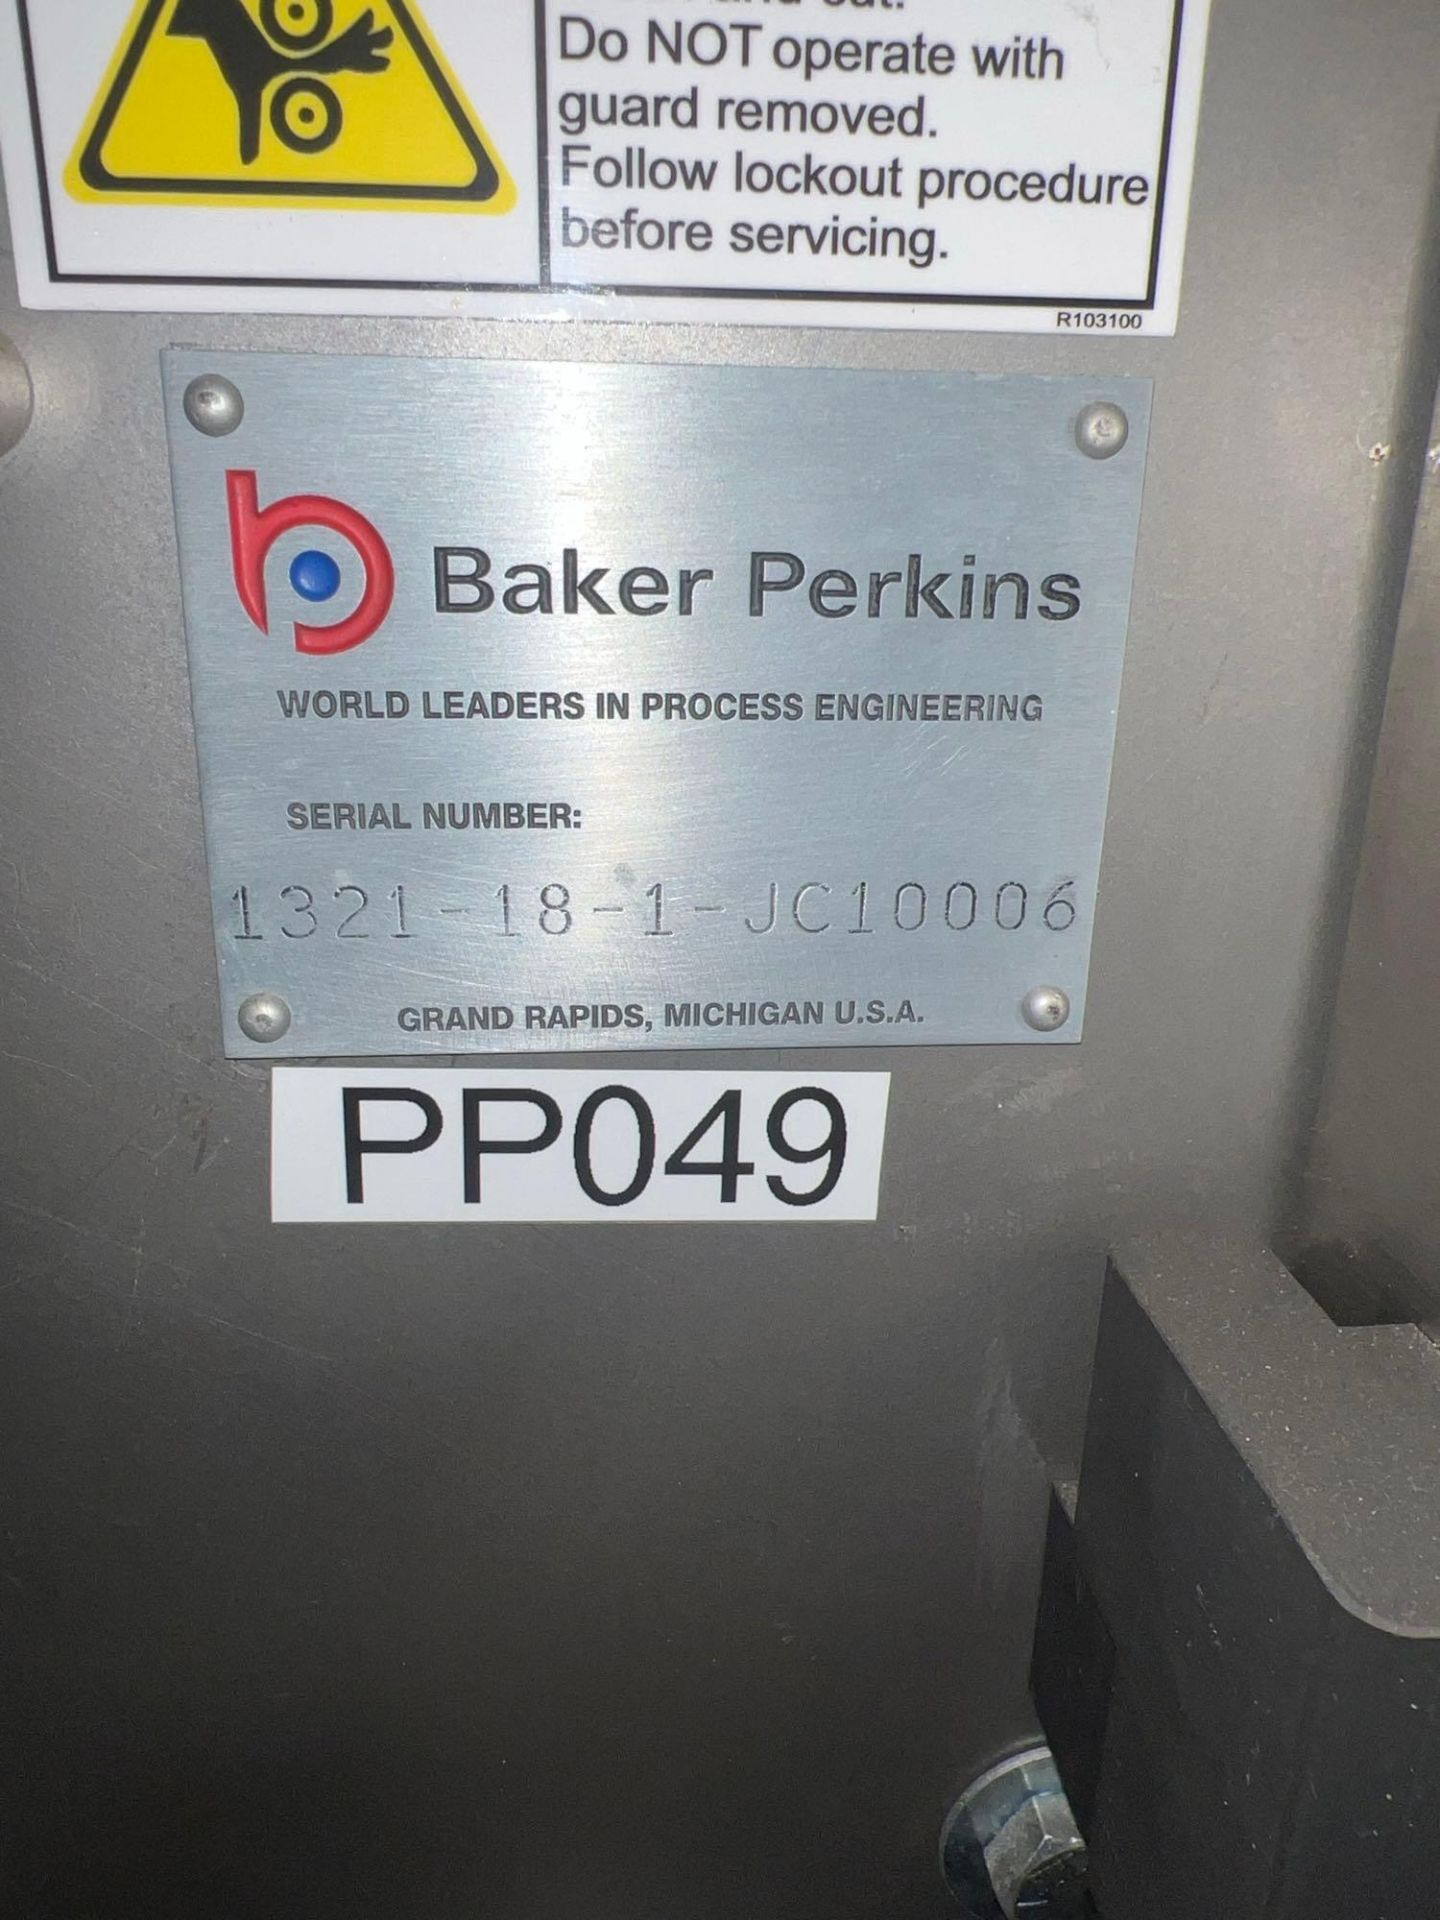 Baker Perkins TruClean Stainless Steel Rotary Cutter - Image 5 of 8